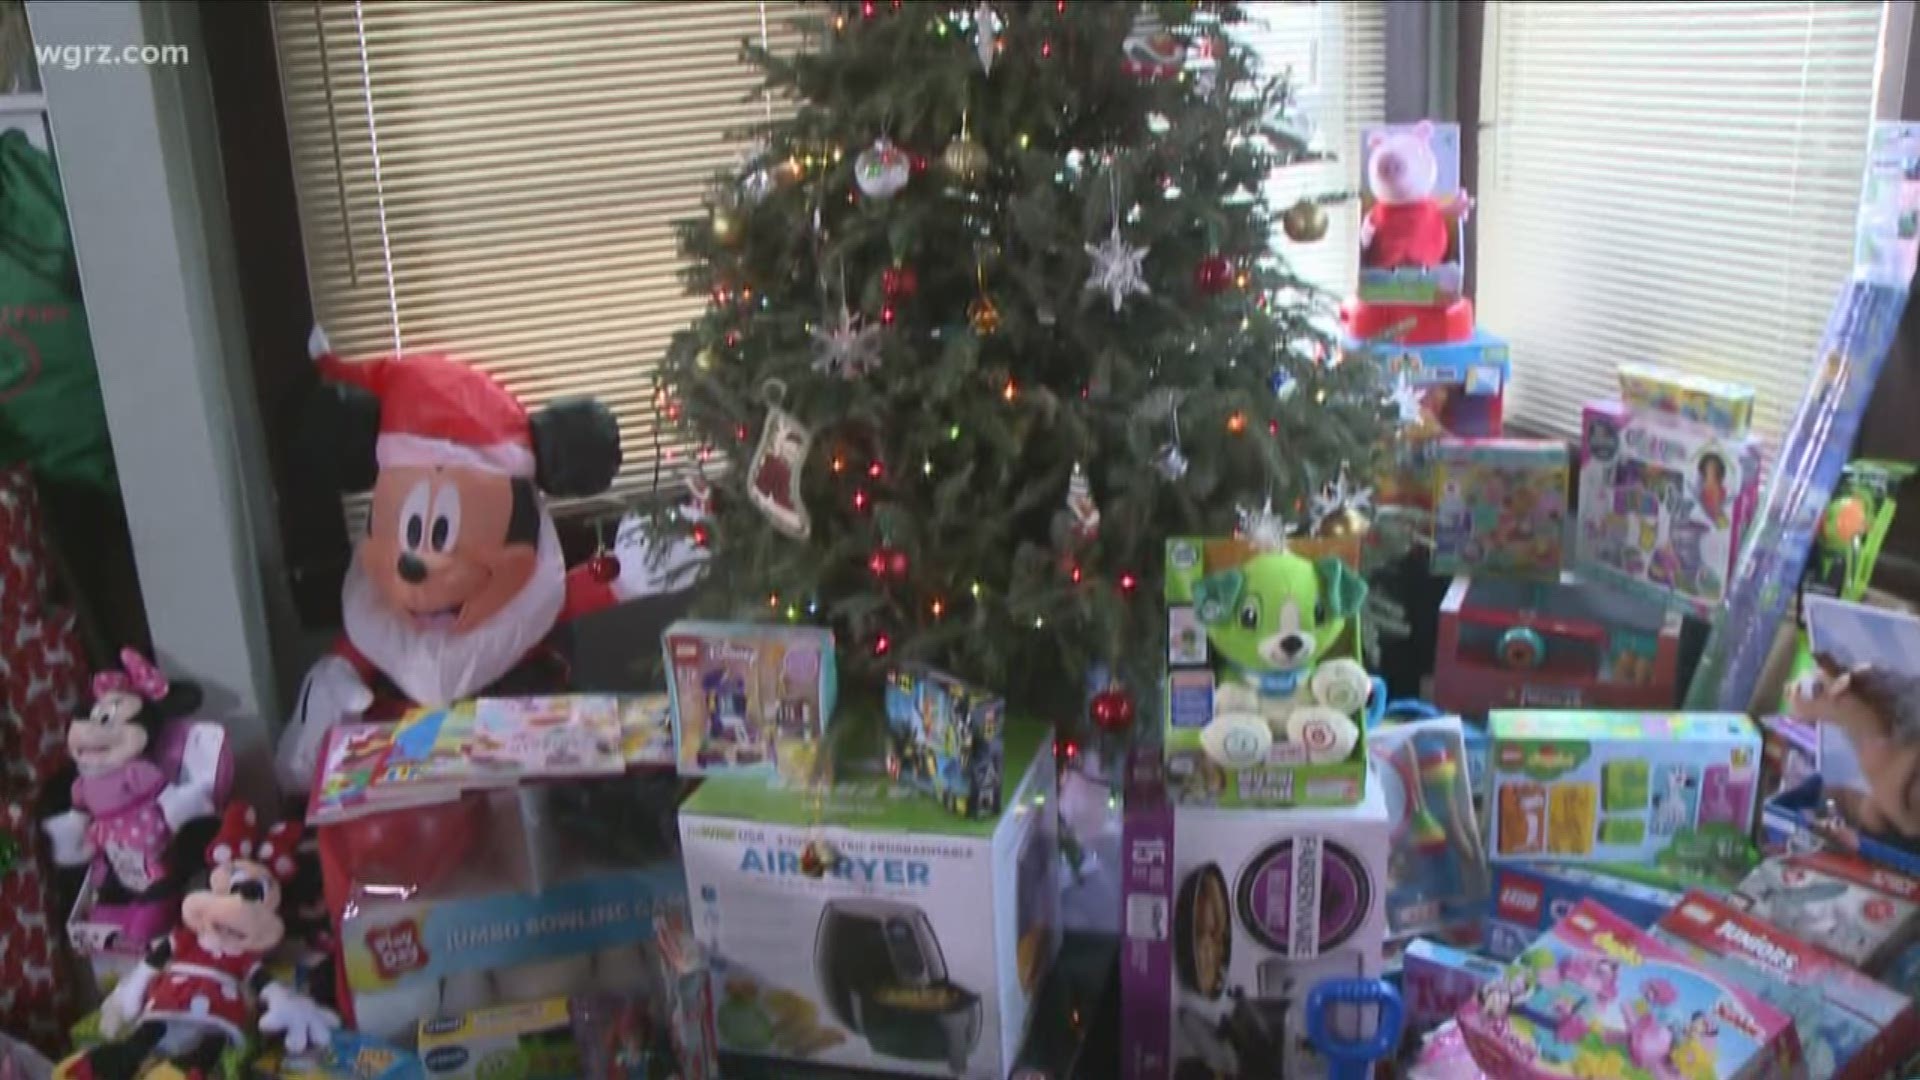 Western New York showered Lamont Thomas and his 5 adopted kids with gifts this Christmas day this year, and they couldn't be happier.